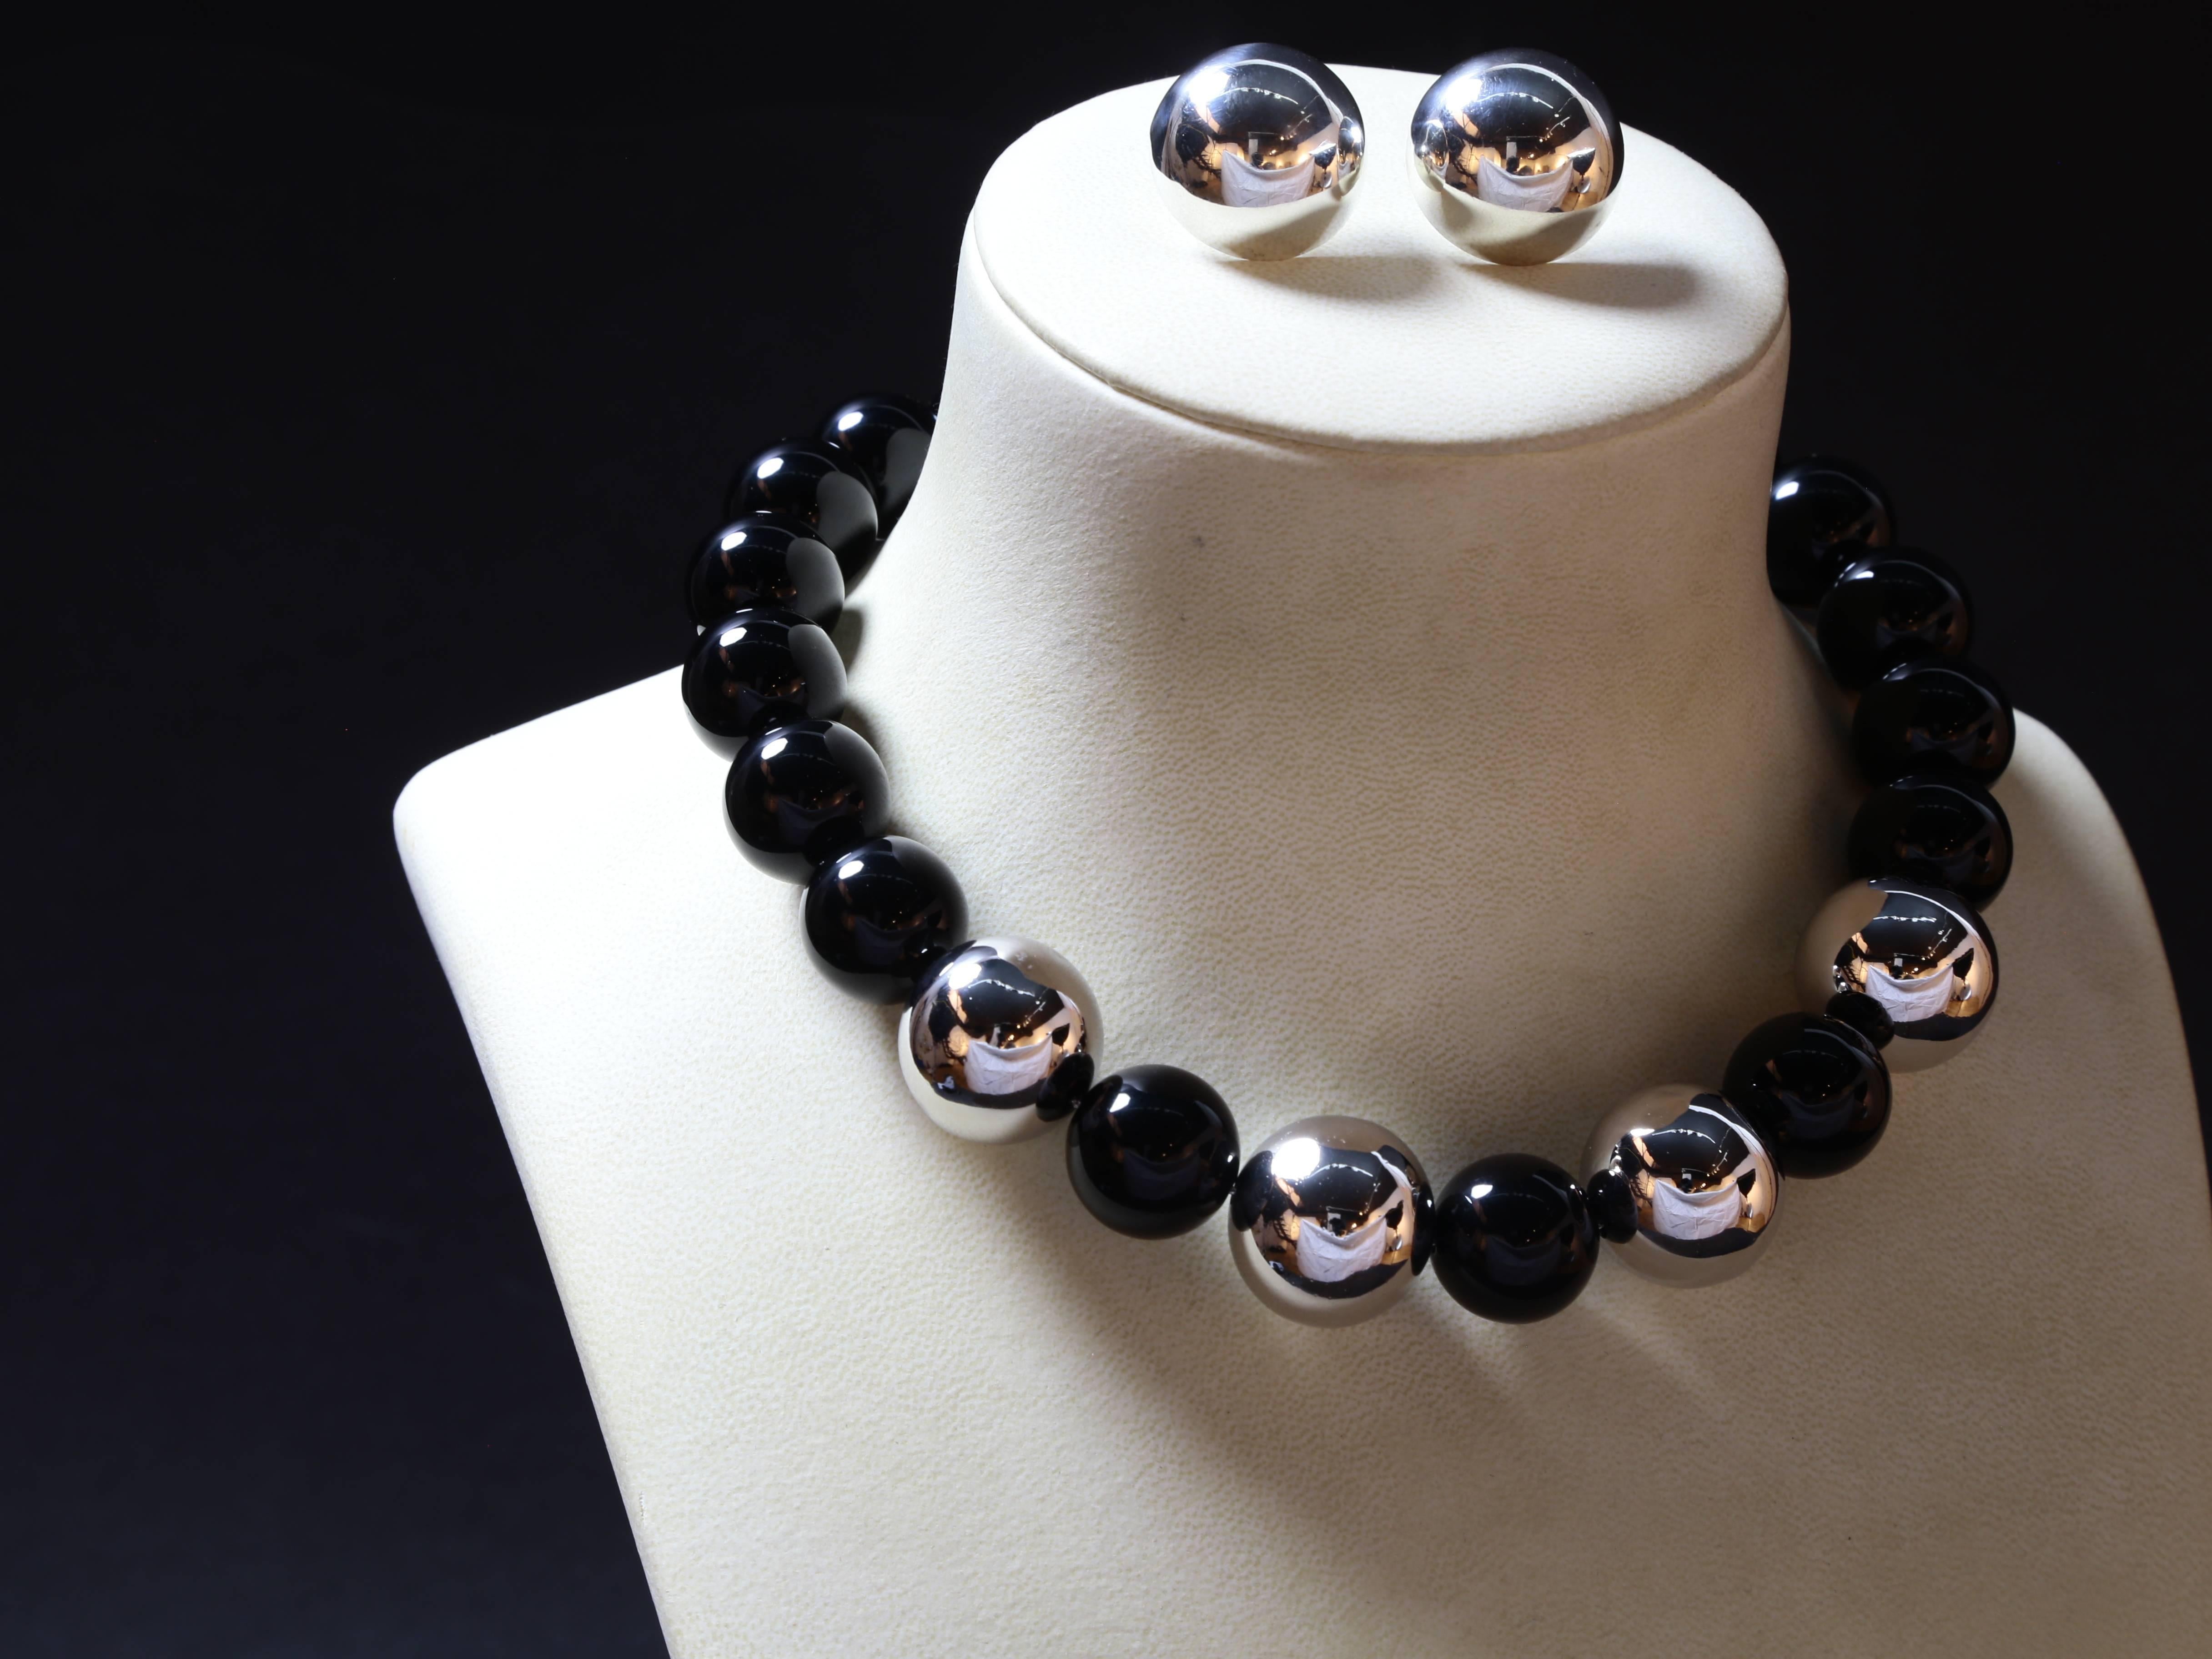 Fabulous large black onyx 20 mm bead necklace enhanced with four sterling silver 24 mm. balls, rhodium plated to prevent tarnishing; attached with sterling silver lobster claw. The necklace accompanied by a co-coordinating pair of large sterling